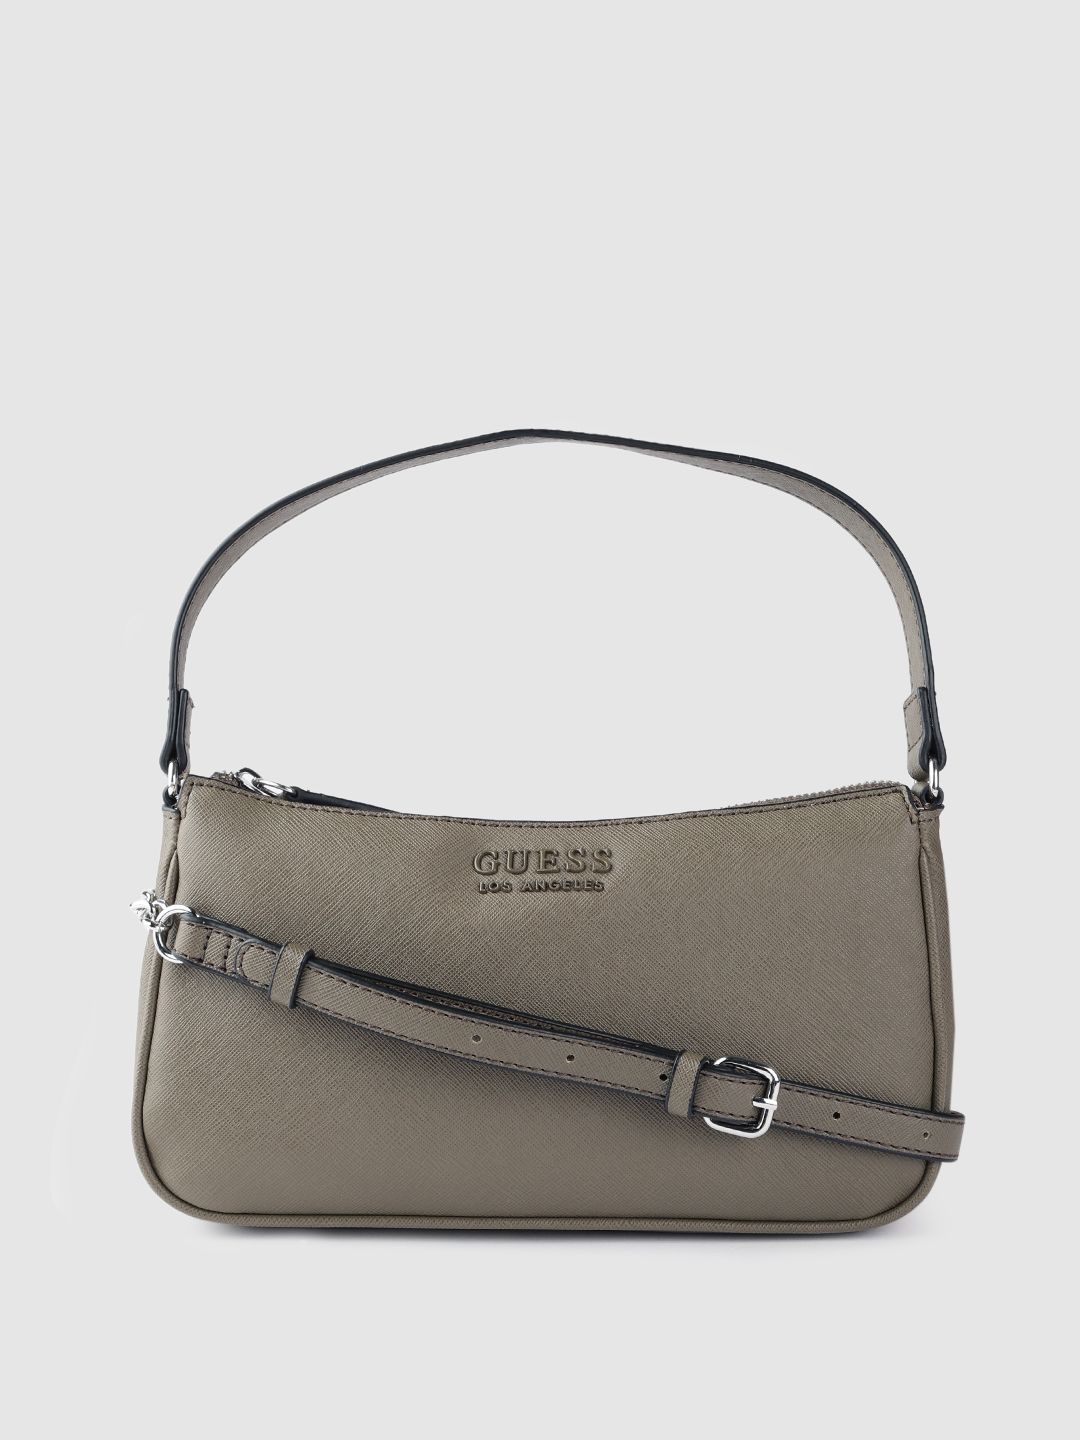 GUESS Women Taupe Solid Structured Shoulder Bag Price in India